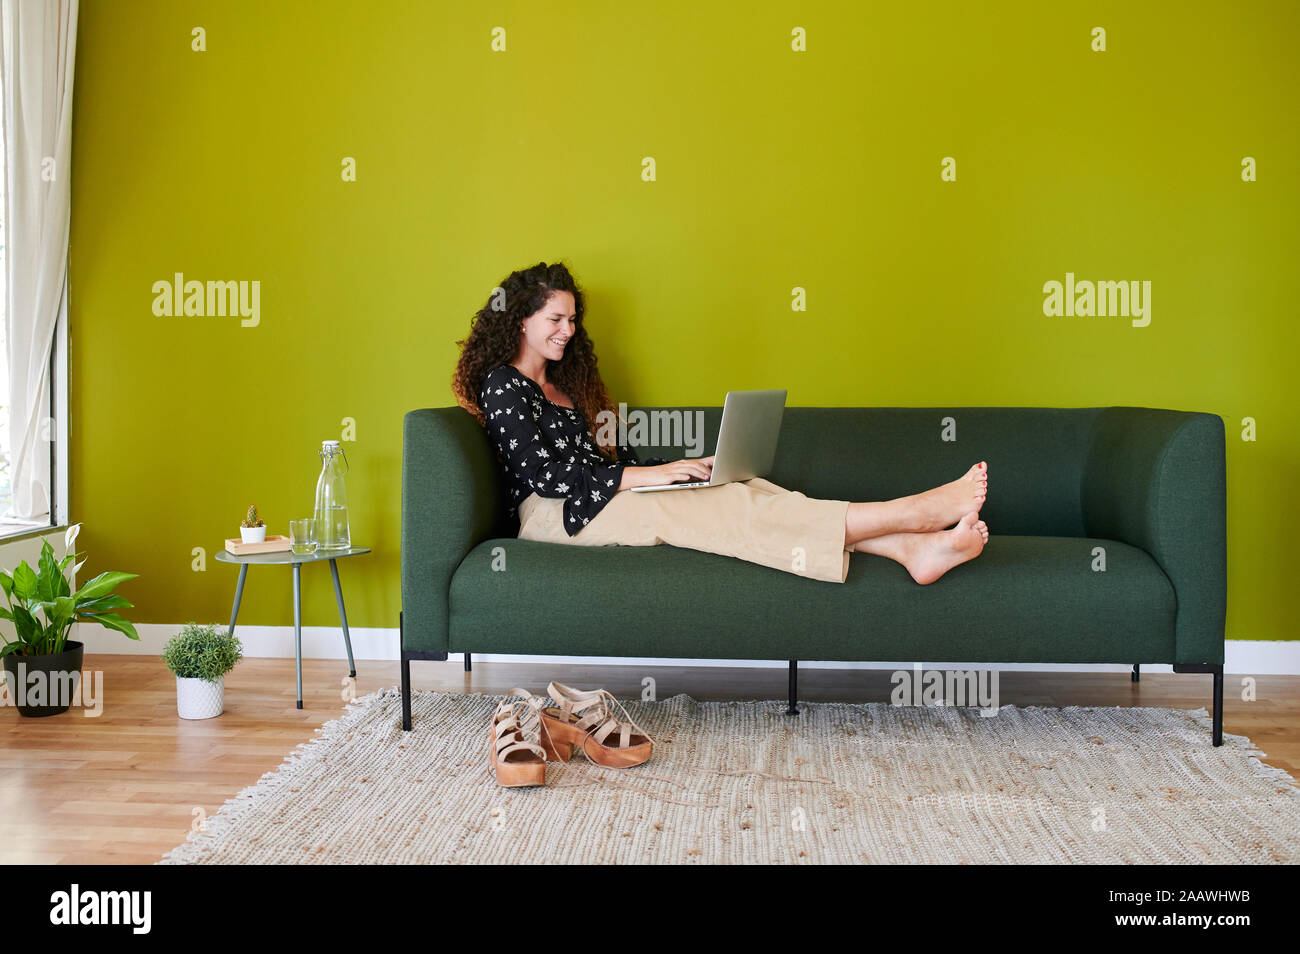 Smiling young businesswoman using laptop on couch in modern office Banque D'Images